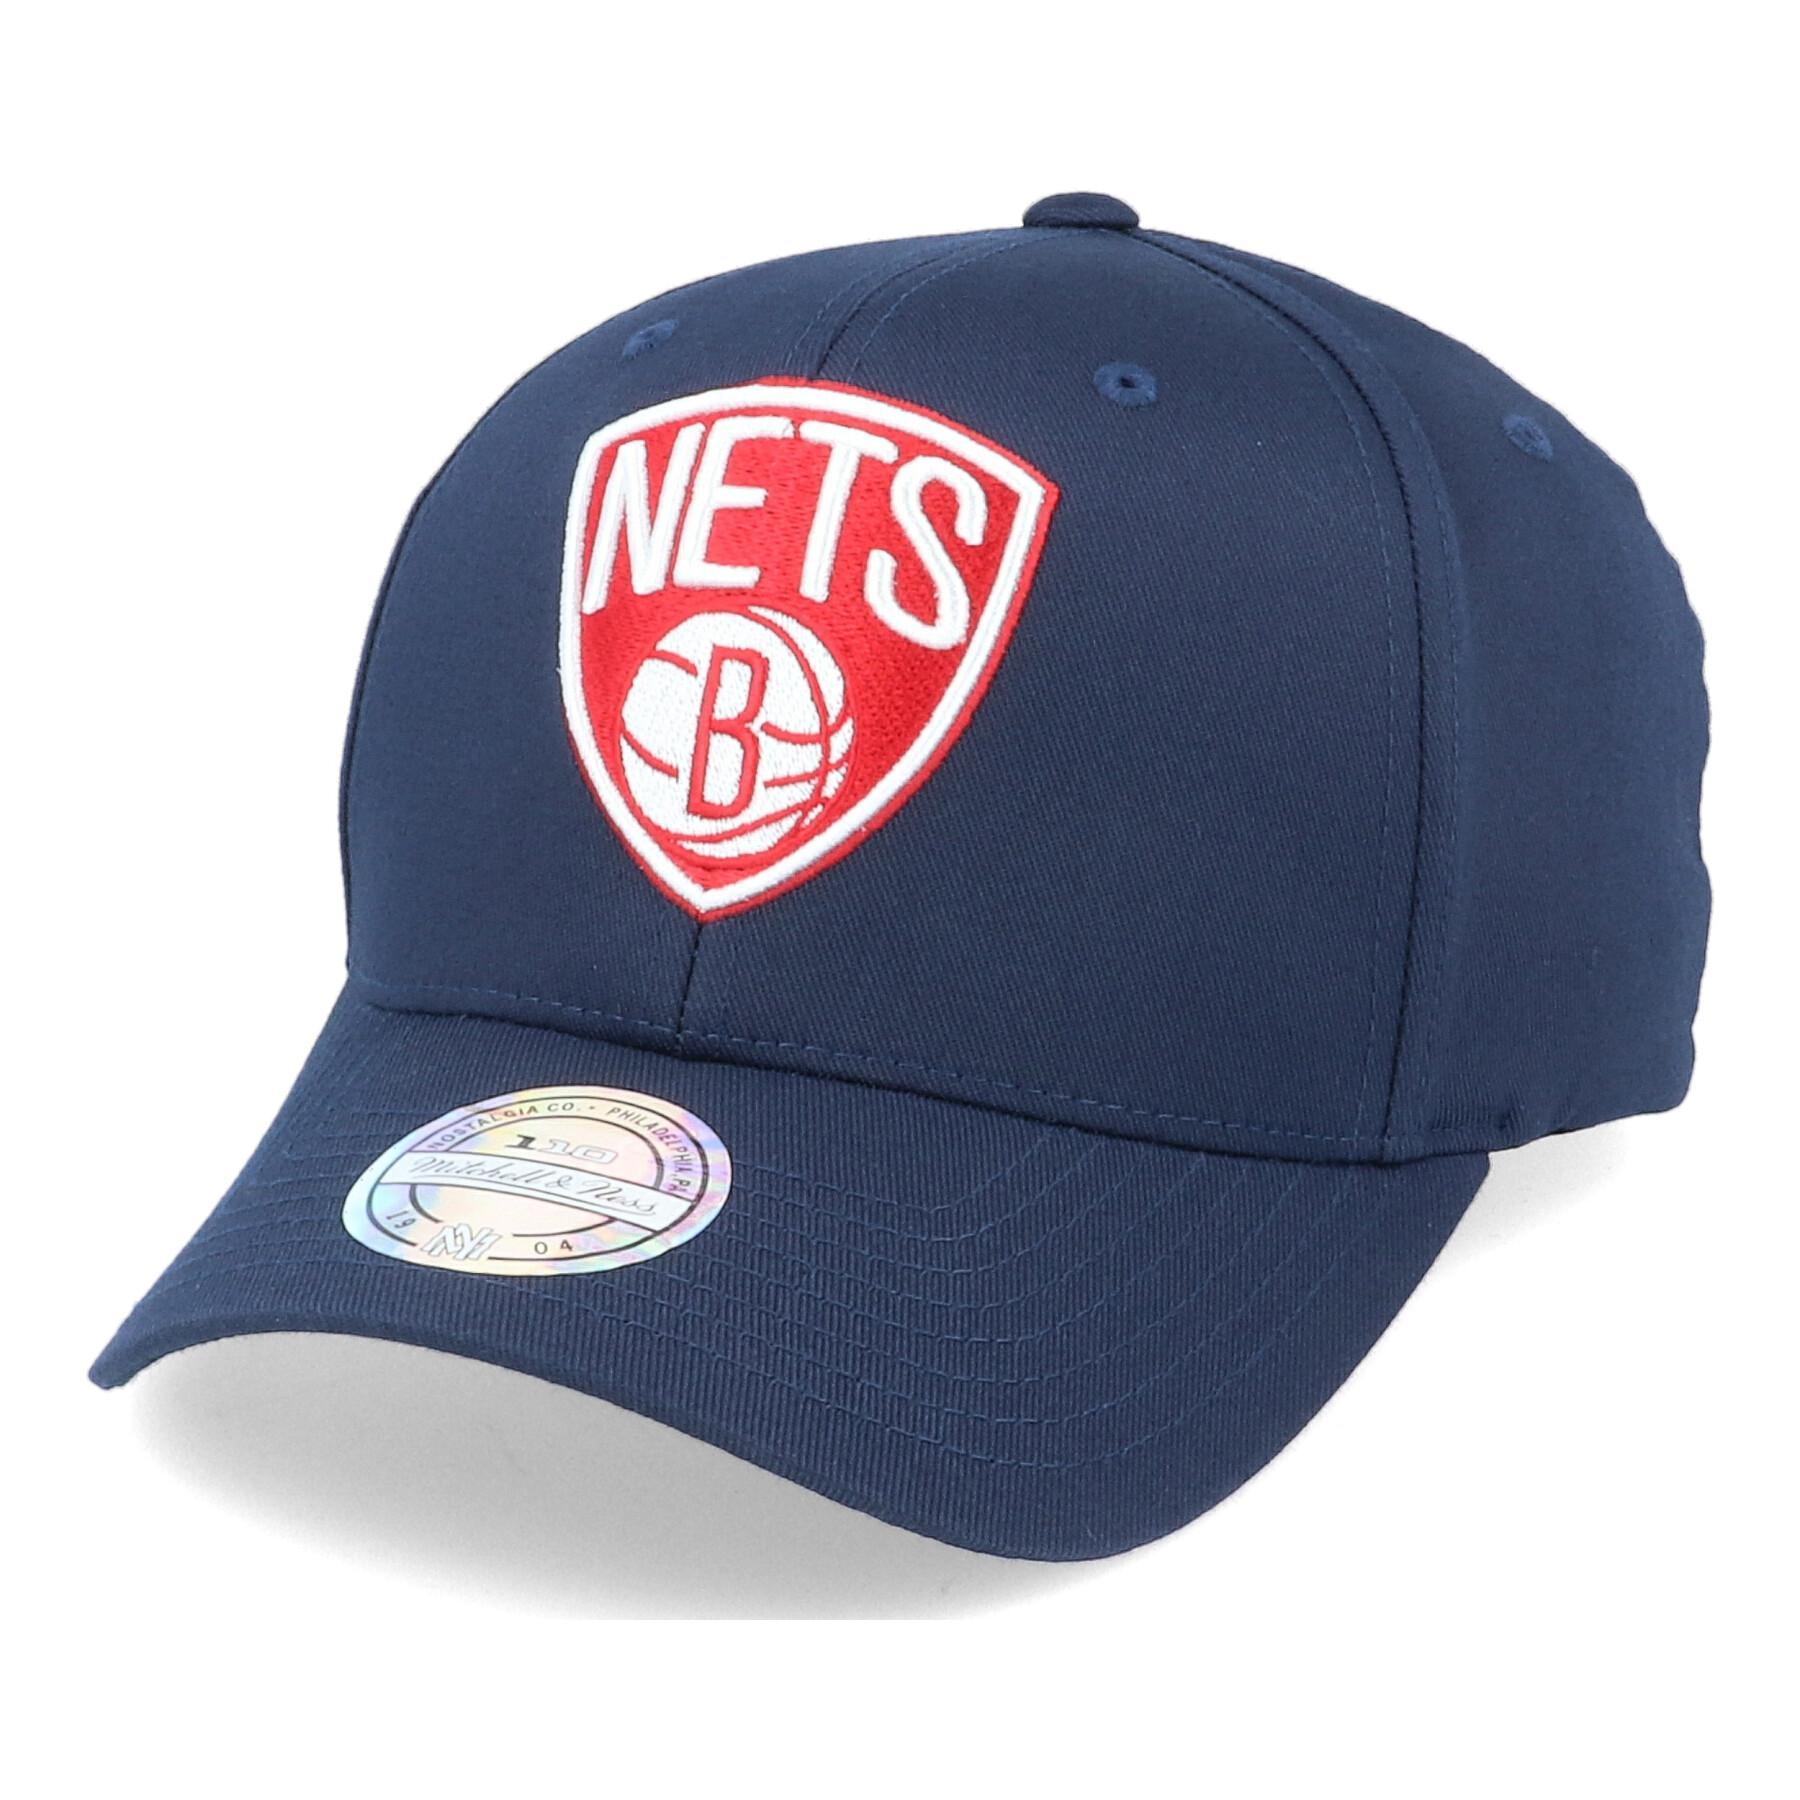 Pet Brooklyn Nets navy/red/white 110